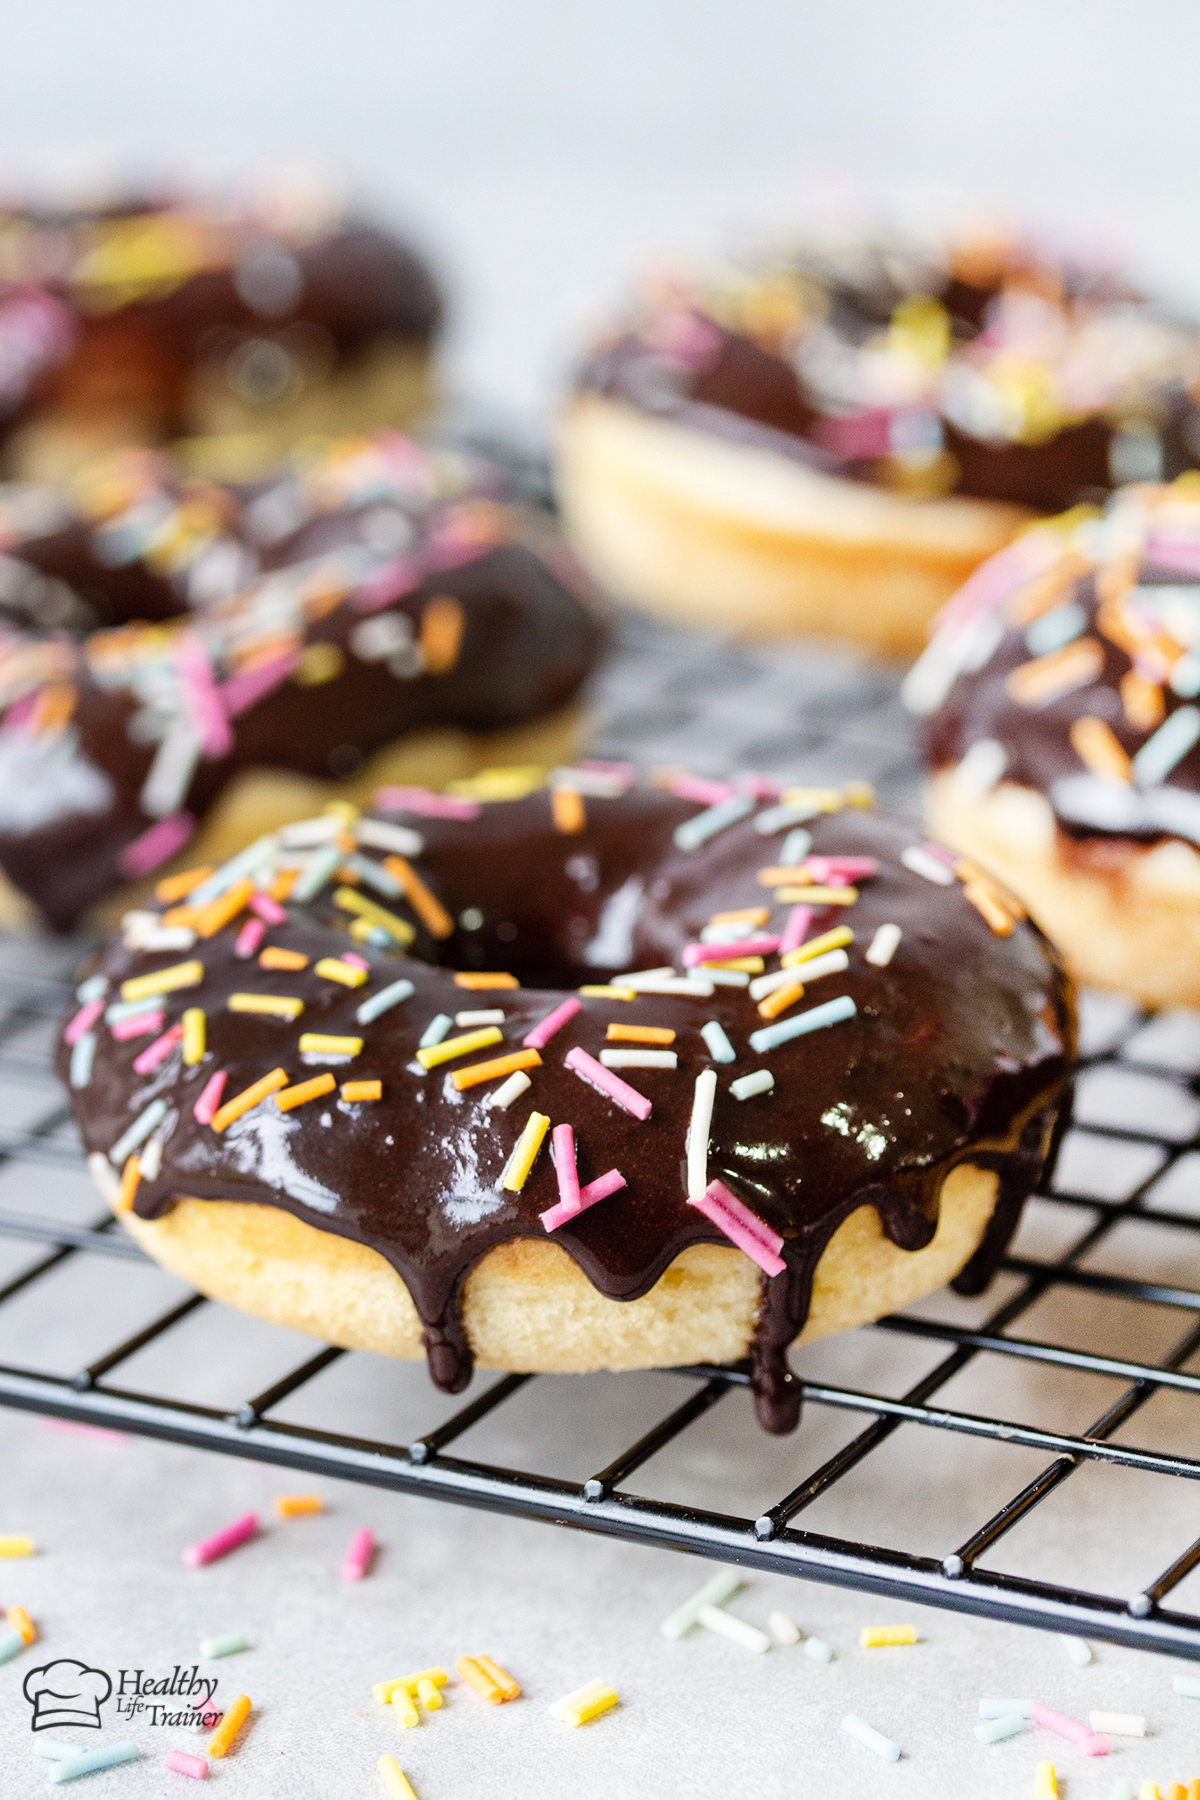 Homemade Baked Donuts With Chocolate Frosting